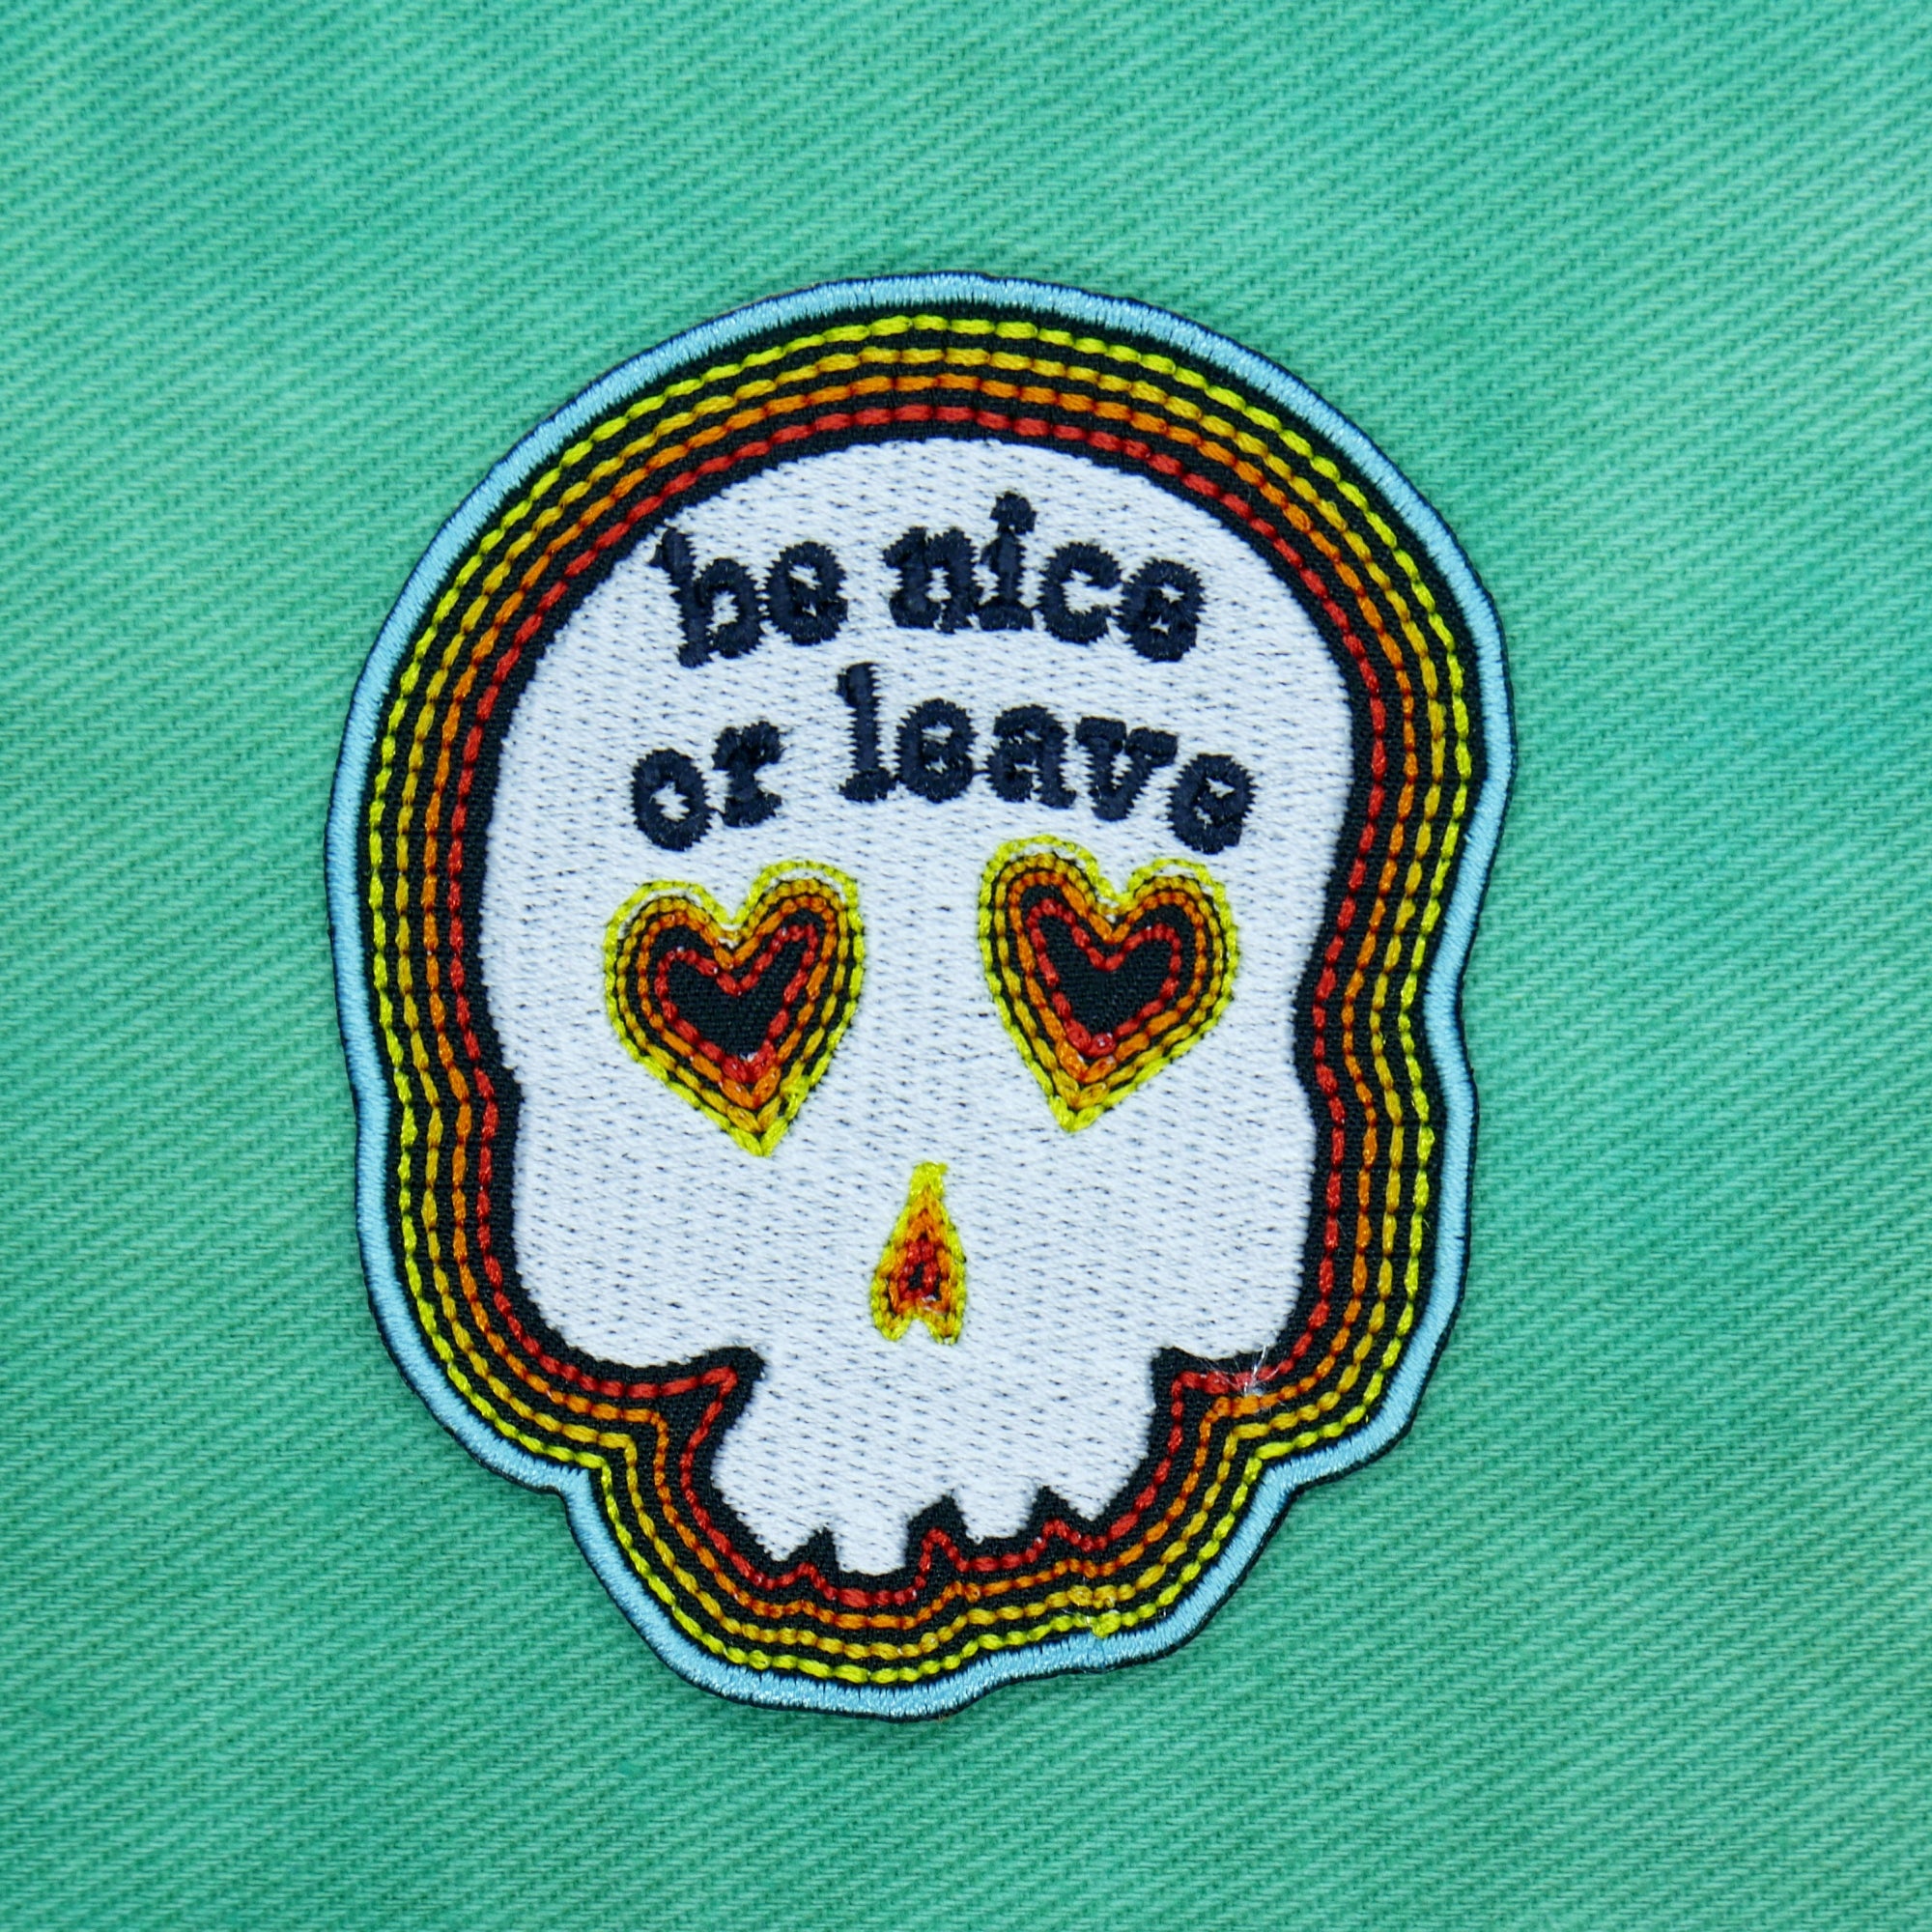 Be Nice or Leave Skull Patch